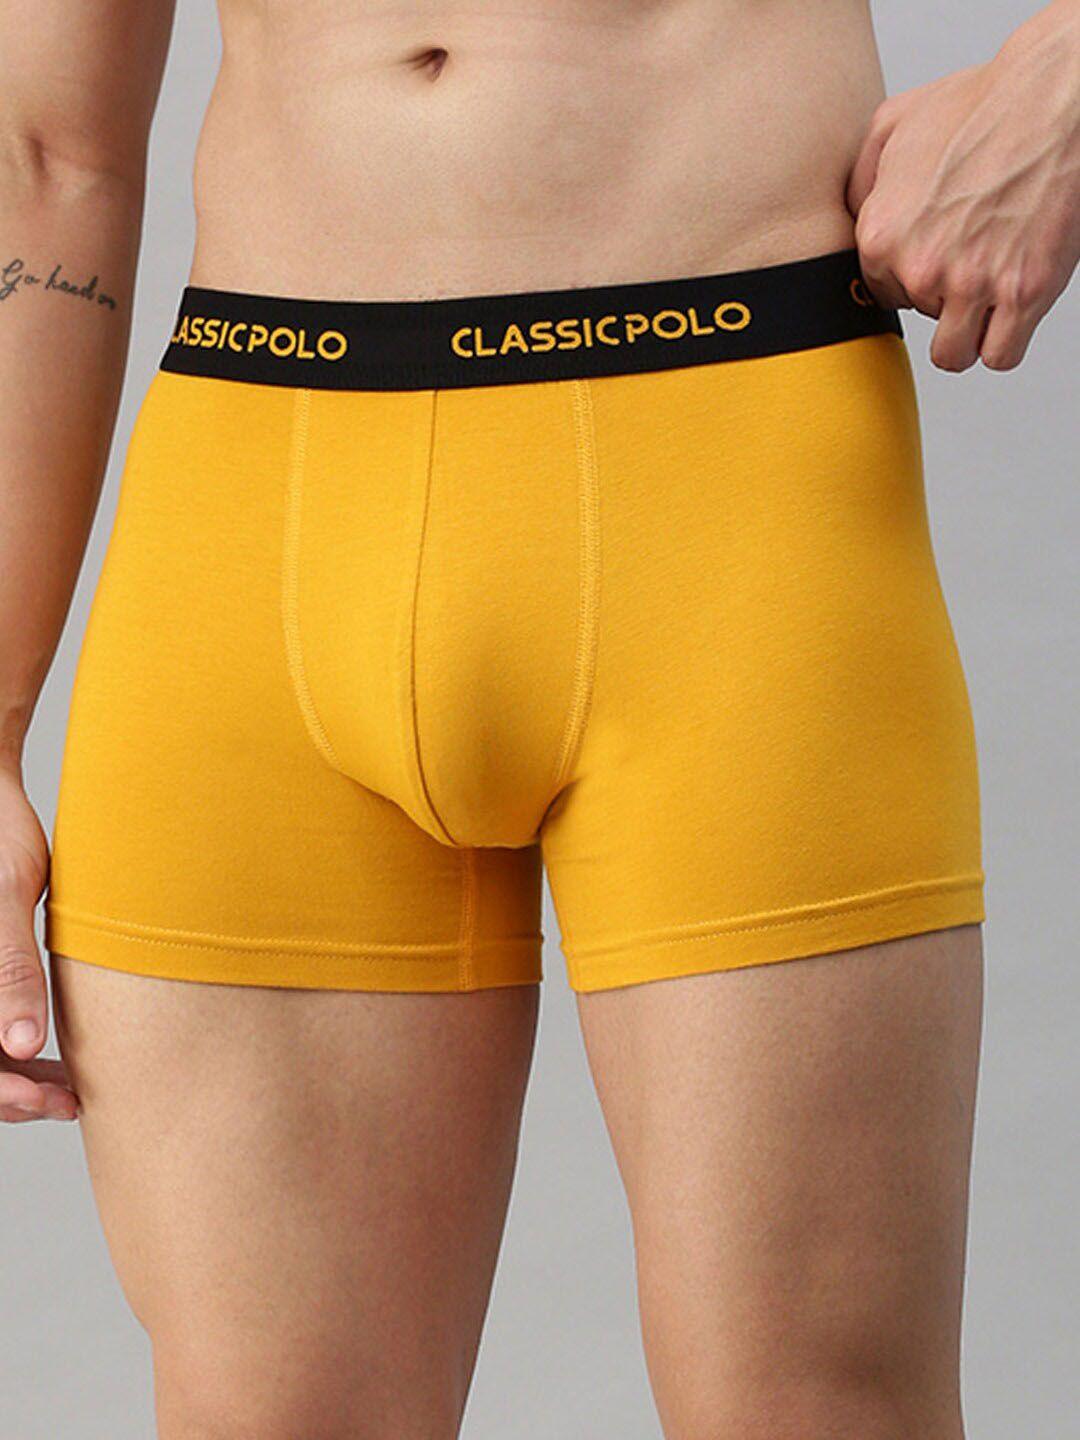 classic polo men double layered contoured pouch slim fit modal short trunks